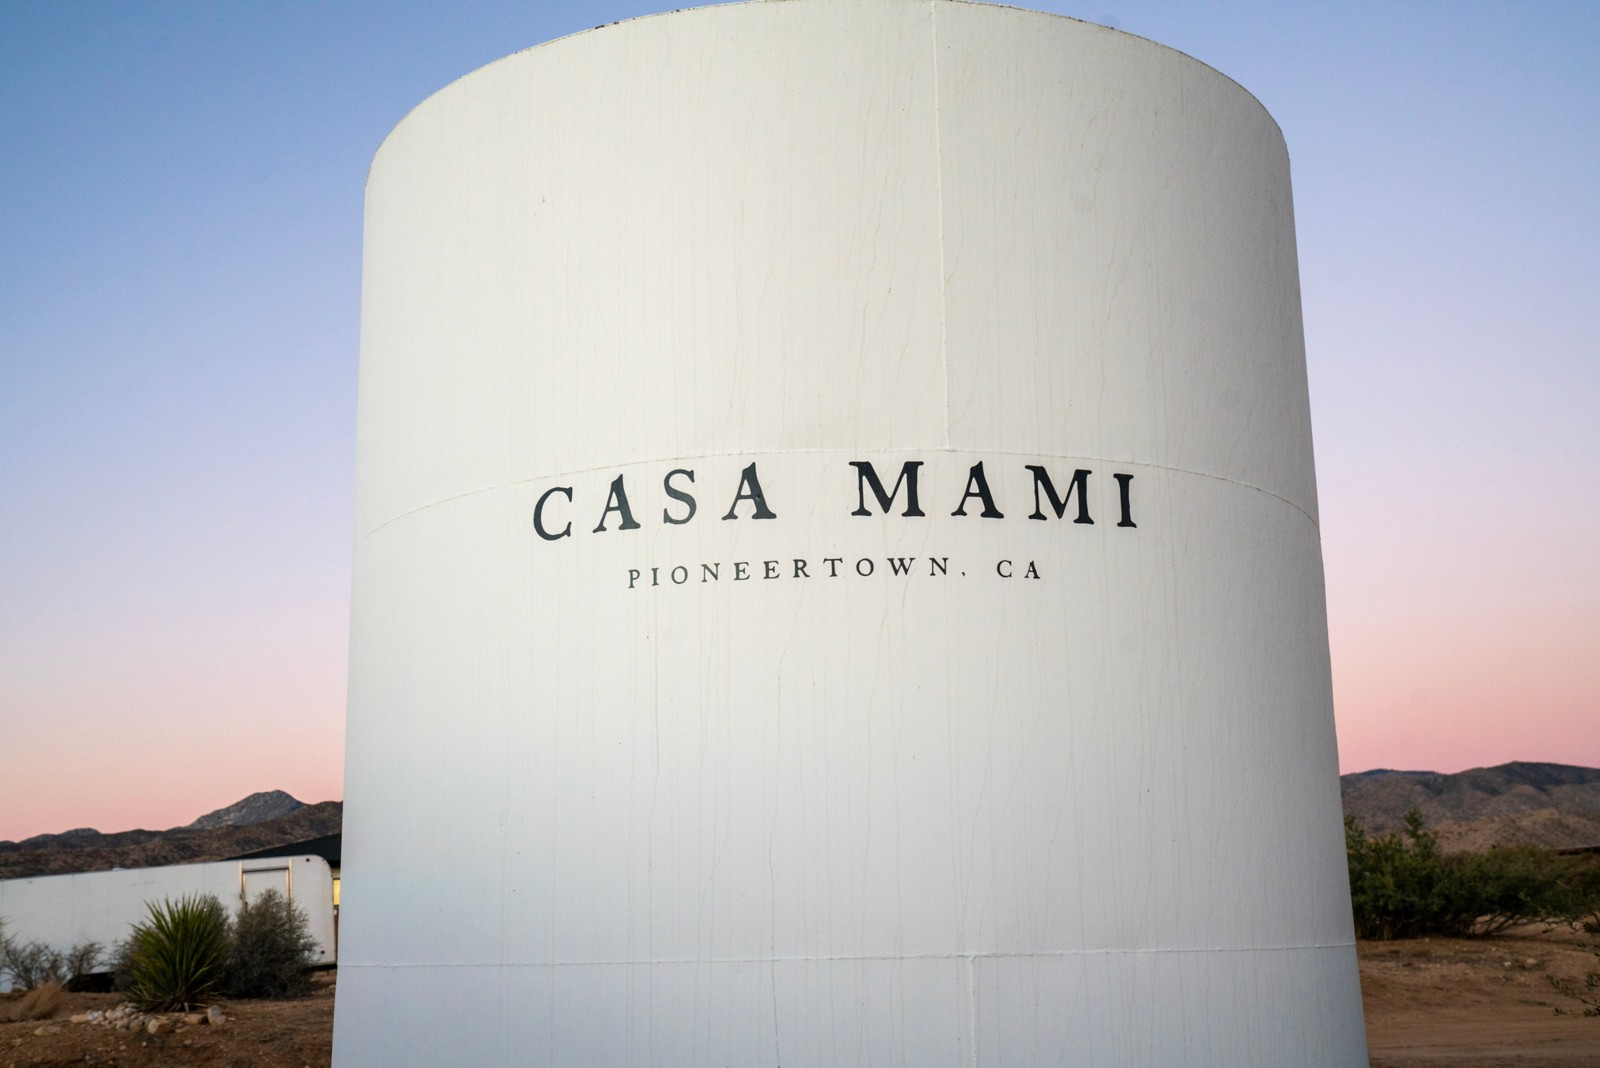 A tall white water reservoir with Carlos Naude's company name, Casa Mami, written on it